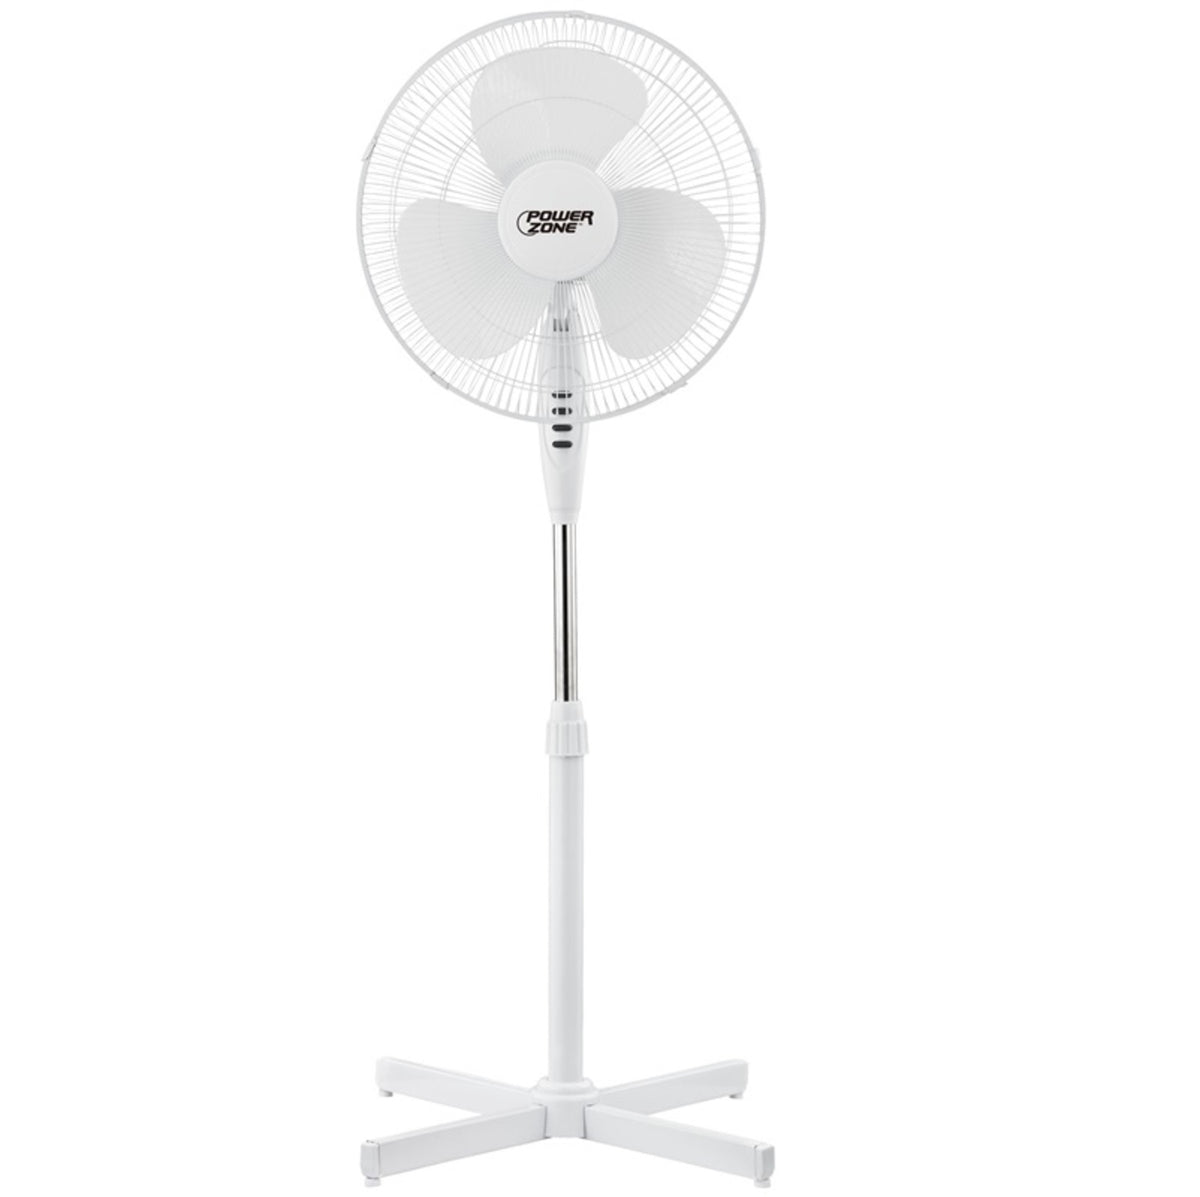 buy oscillating fans at cheap rate in bulk. wholesale & retail ventilation maintenance supply store.